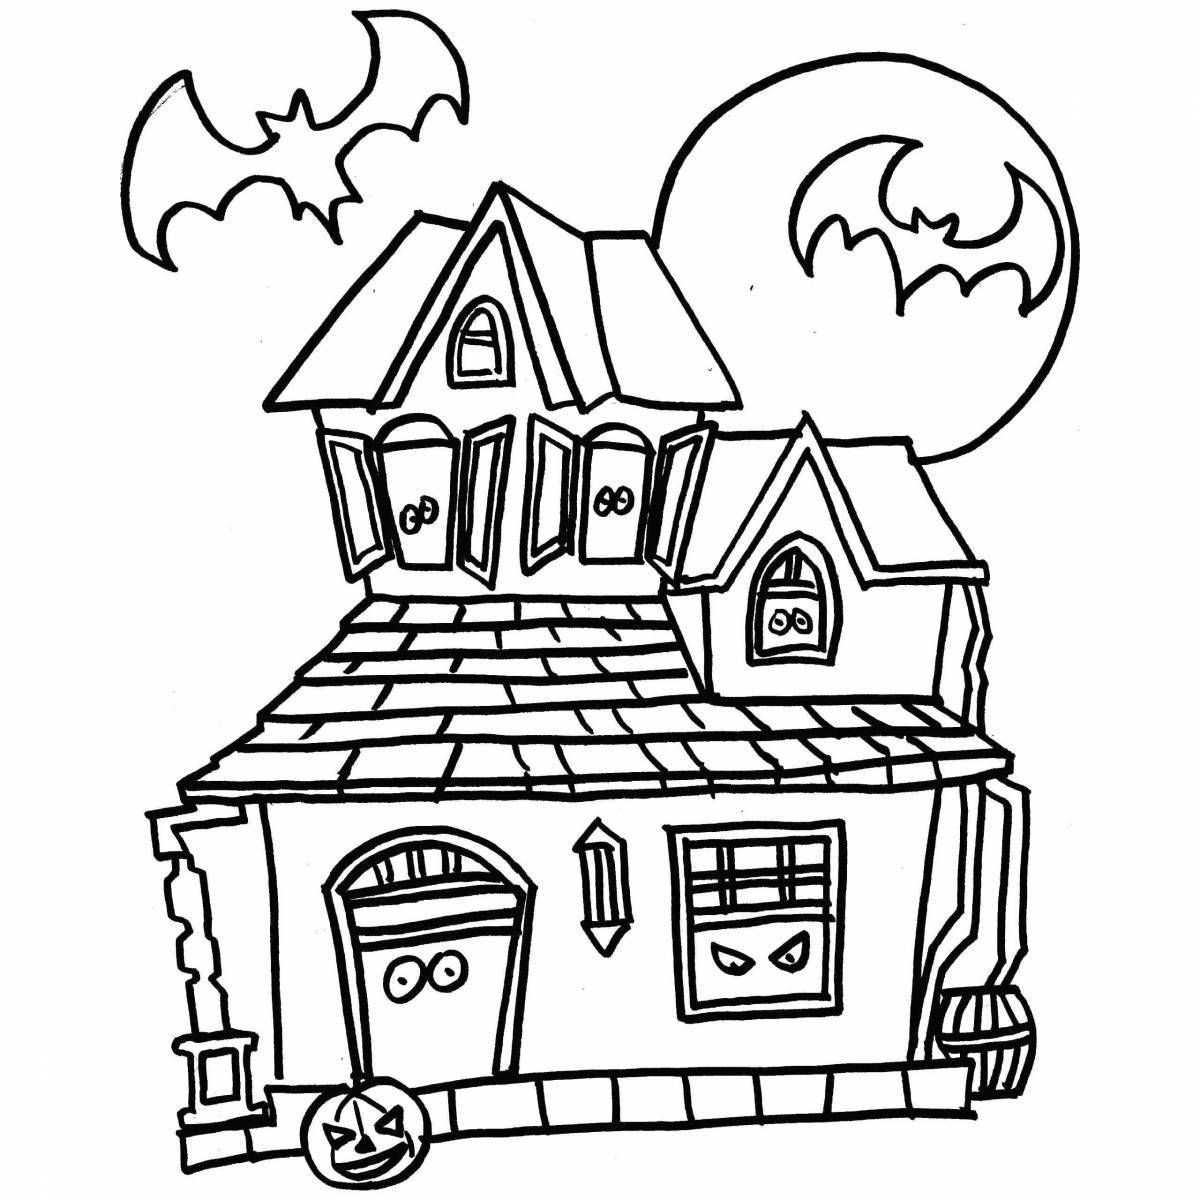 Crazy Asylum coloring pages for 6-7 year olds